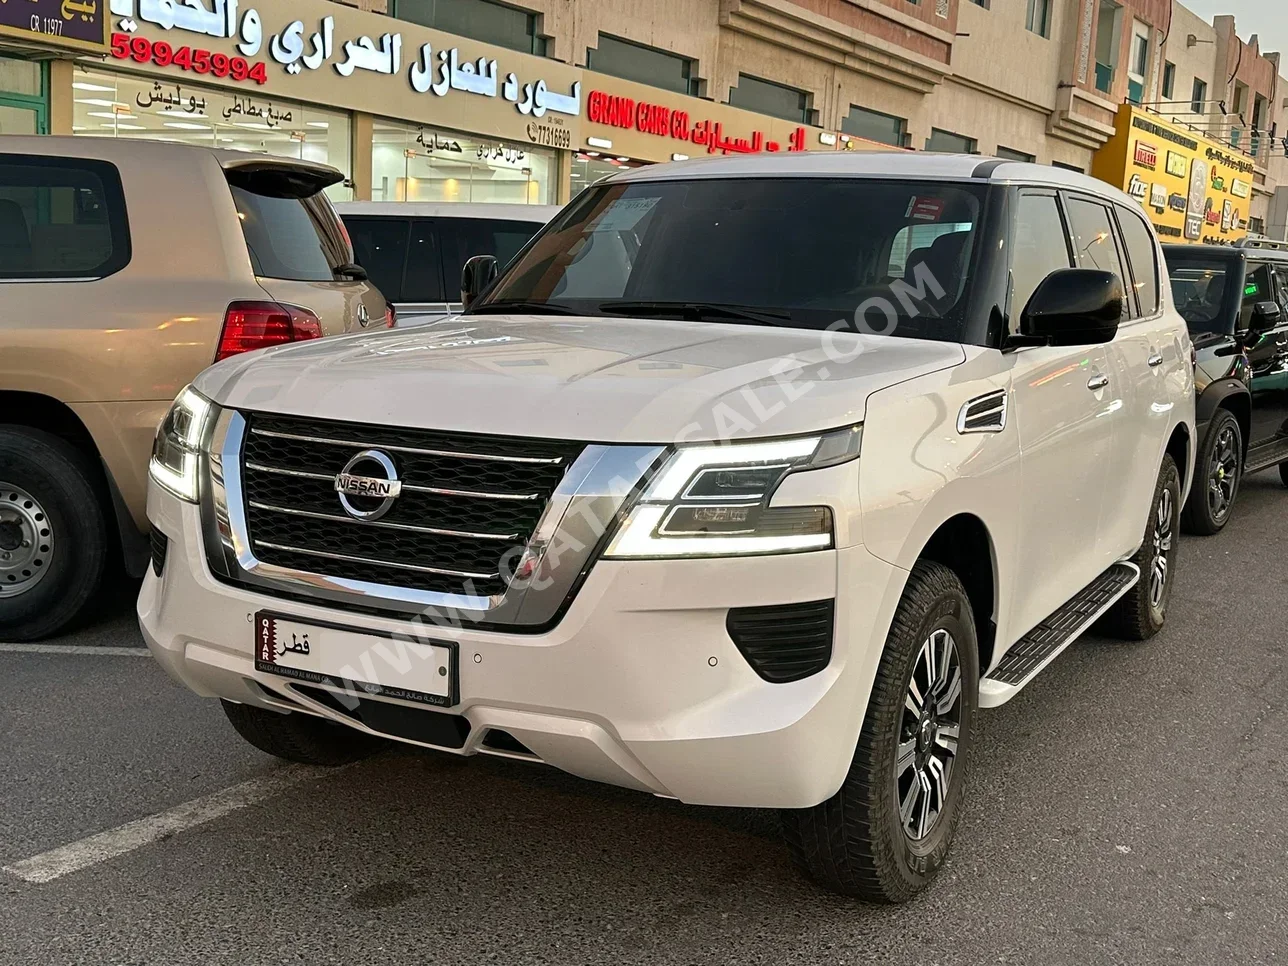 Nissan  Patrol  XE  2020  Automatic  90,000 Km  6 Cylinder  Four Wheel Drive (4WD)  SUV  White